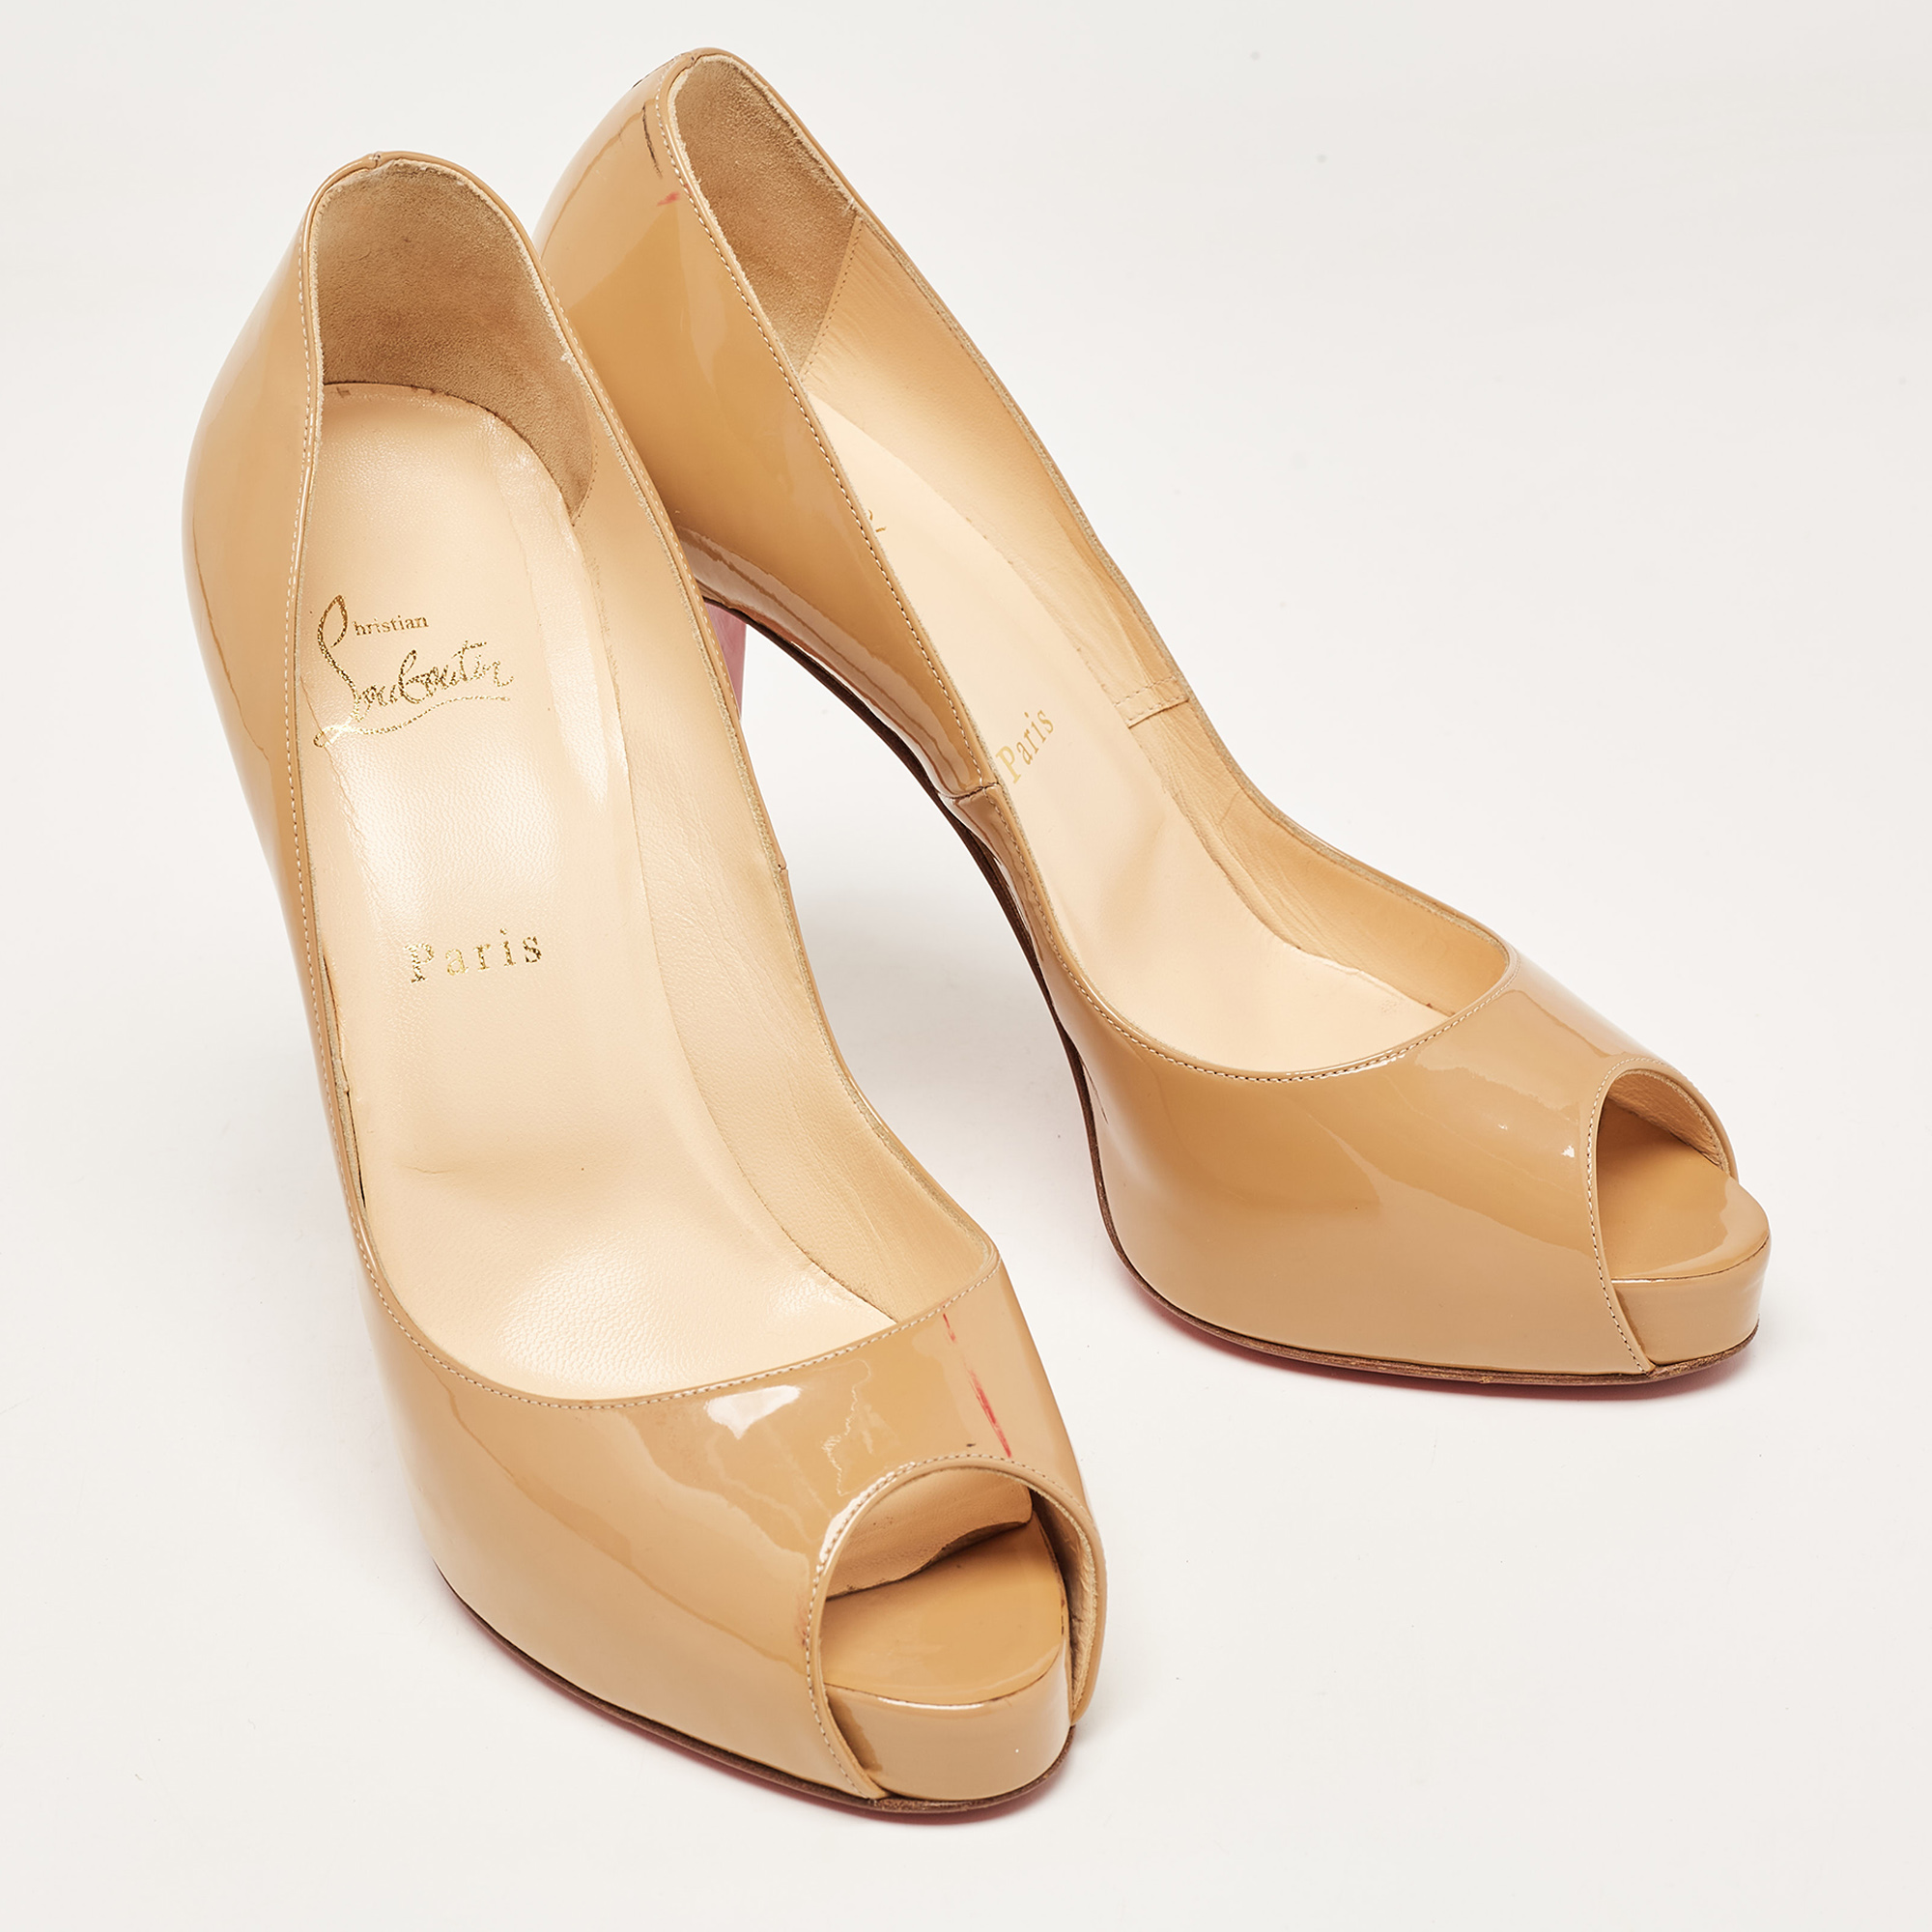 Christian Louboutin Beige Patent Leather Very Prive  Pumps Size 41